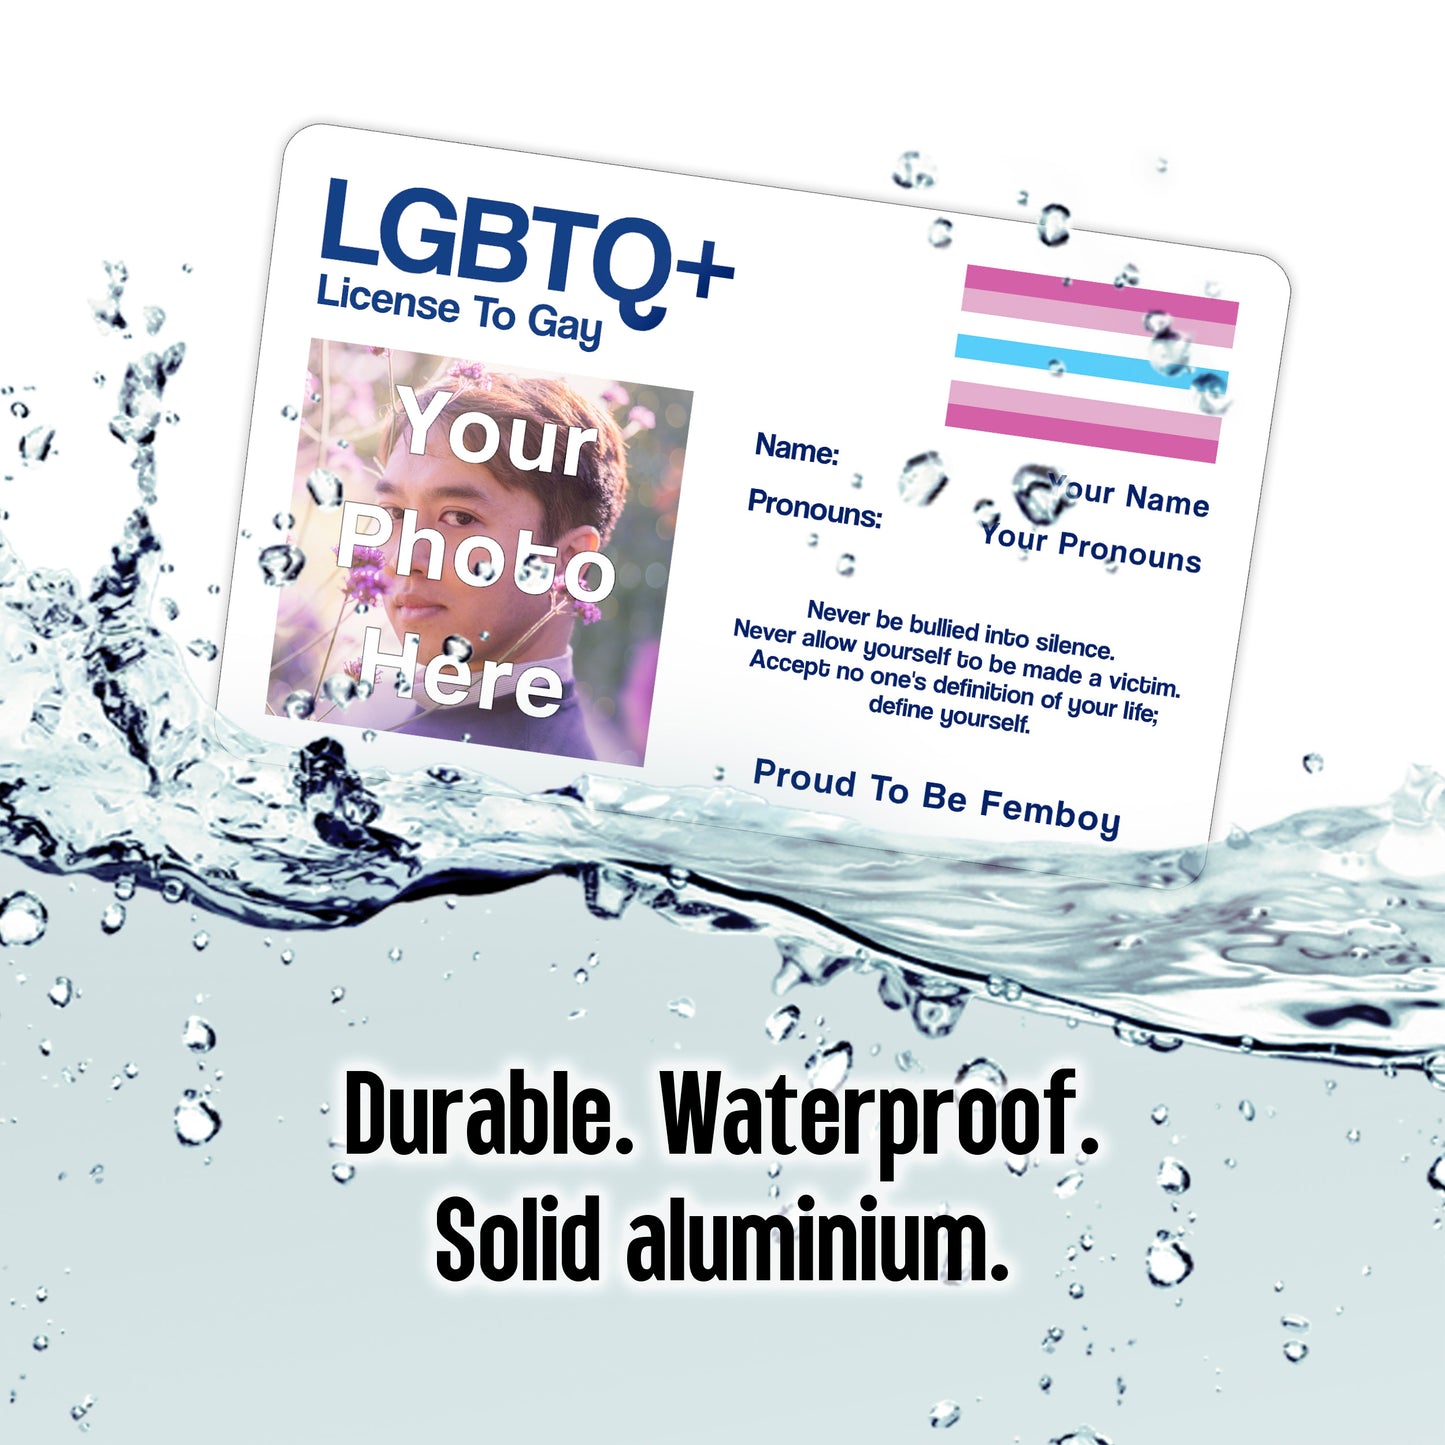 Femboy pride License To Gay aluminium wallet card personalised with your name, photo, and pronouns.